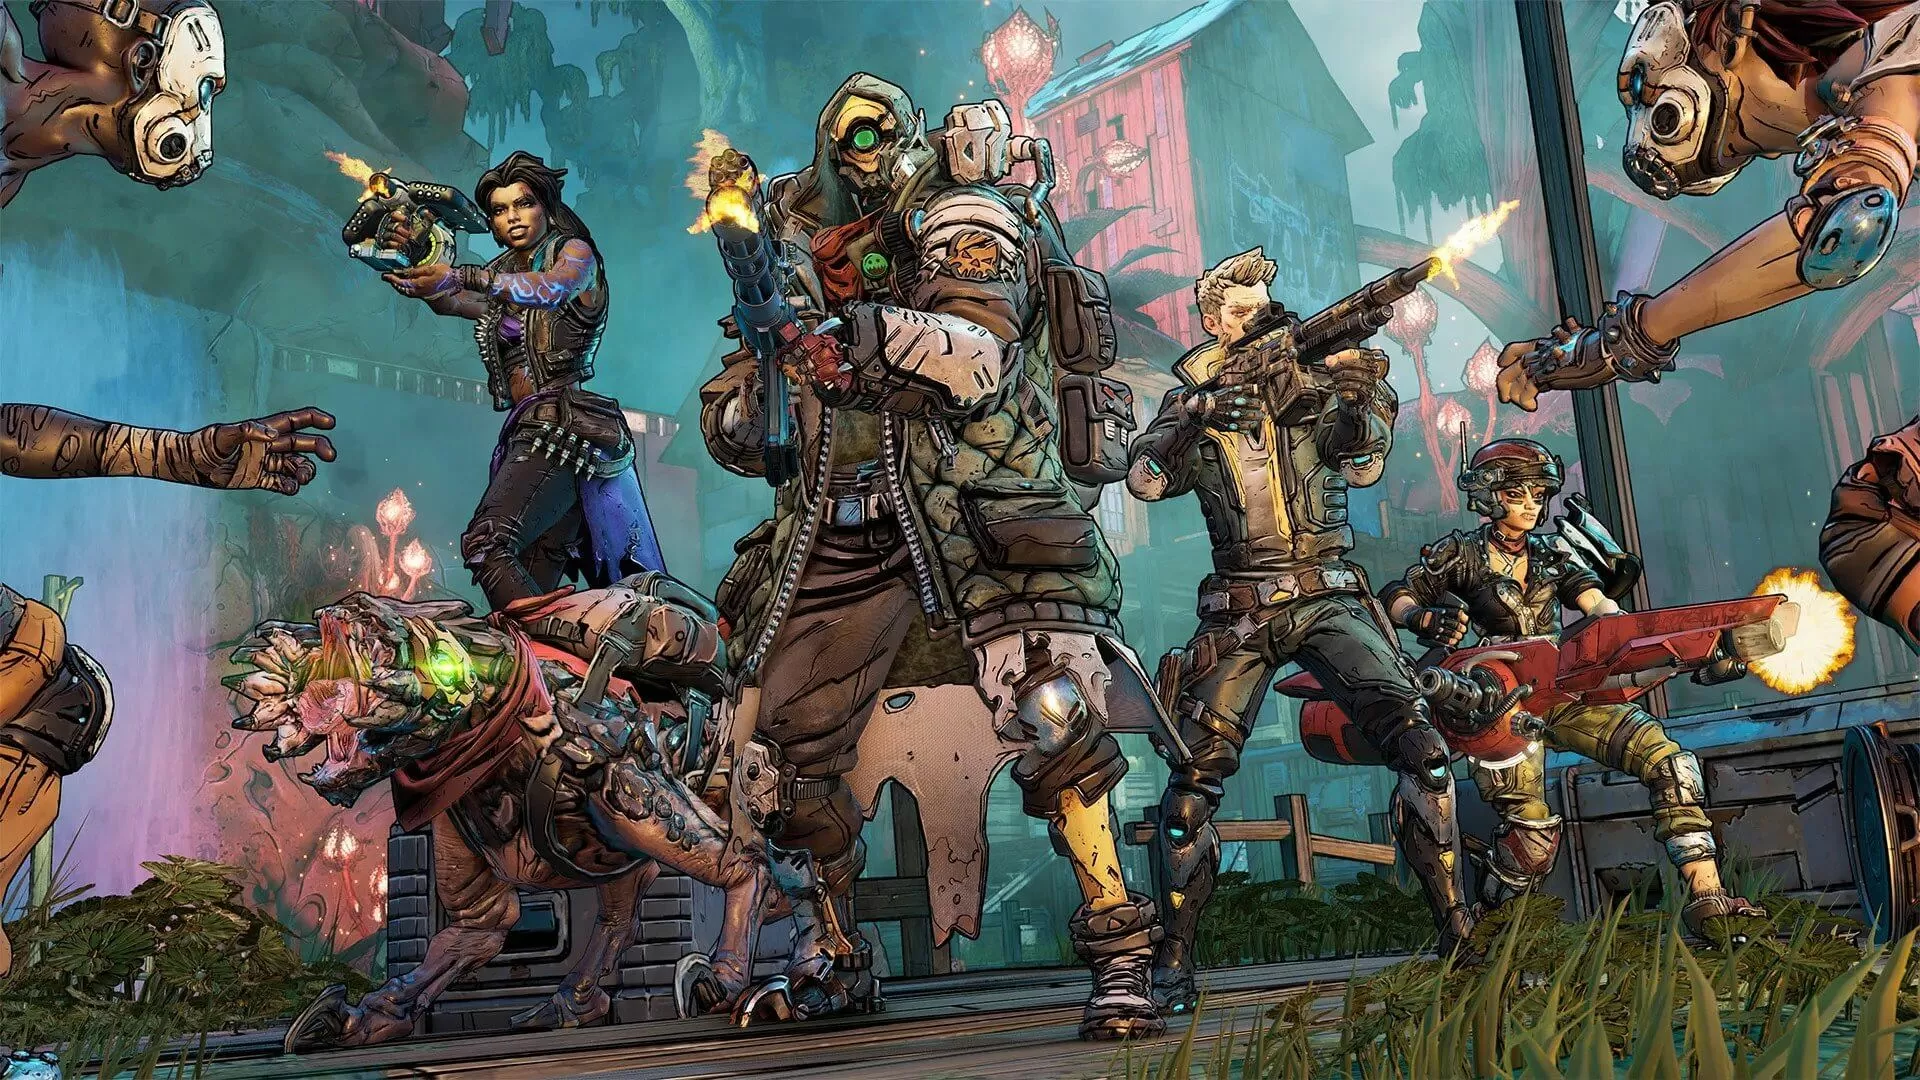 Borderlands 3 is currently free to download and keep on PC